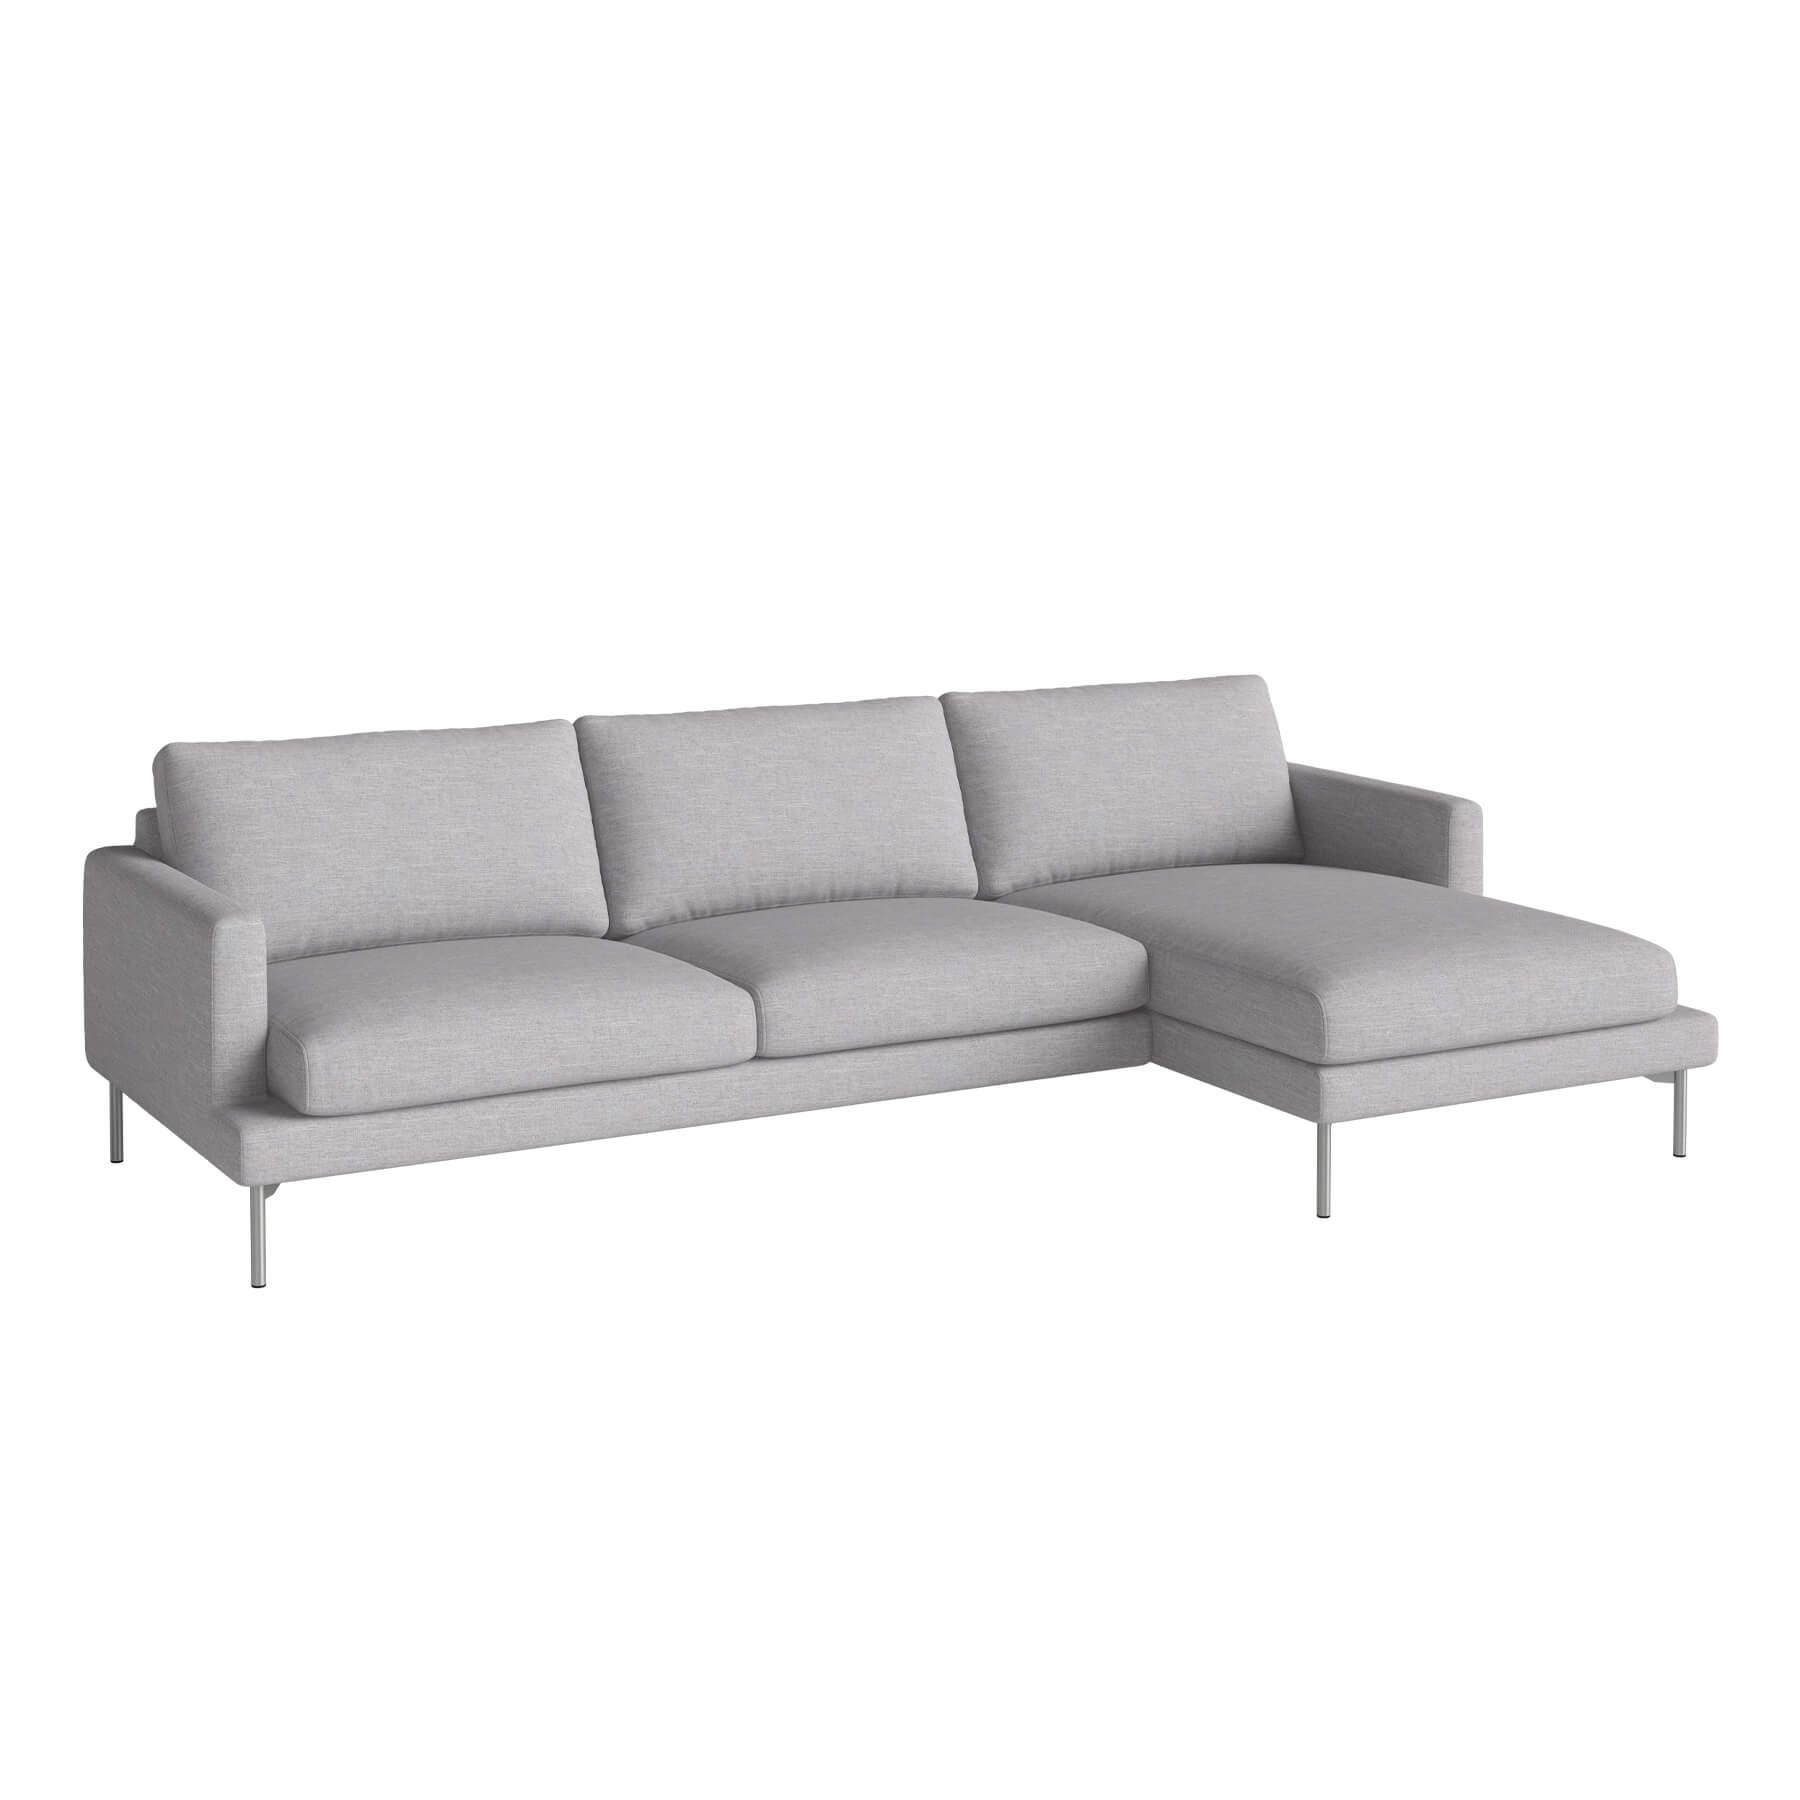 Bolia Veneda Sofa 35 Seater Sofa With Chaise Longue Brushed Steel Baize Light Grey Right Grey Designer Furniture From Holloways Of Ludlow